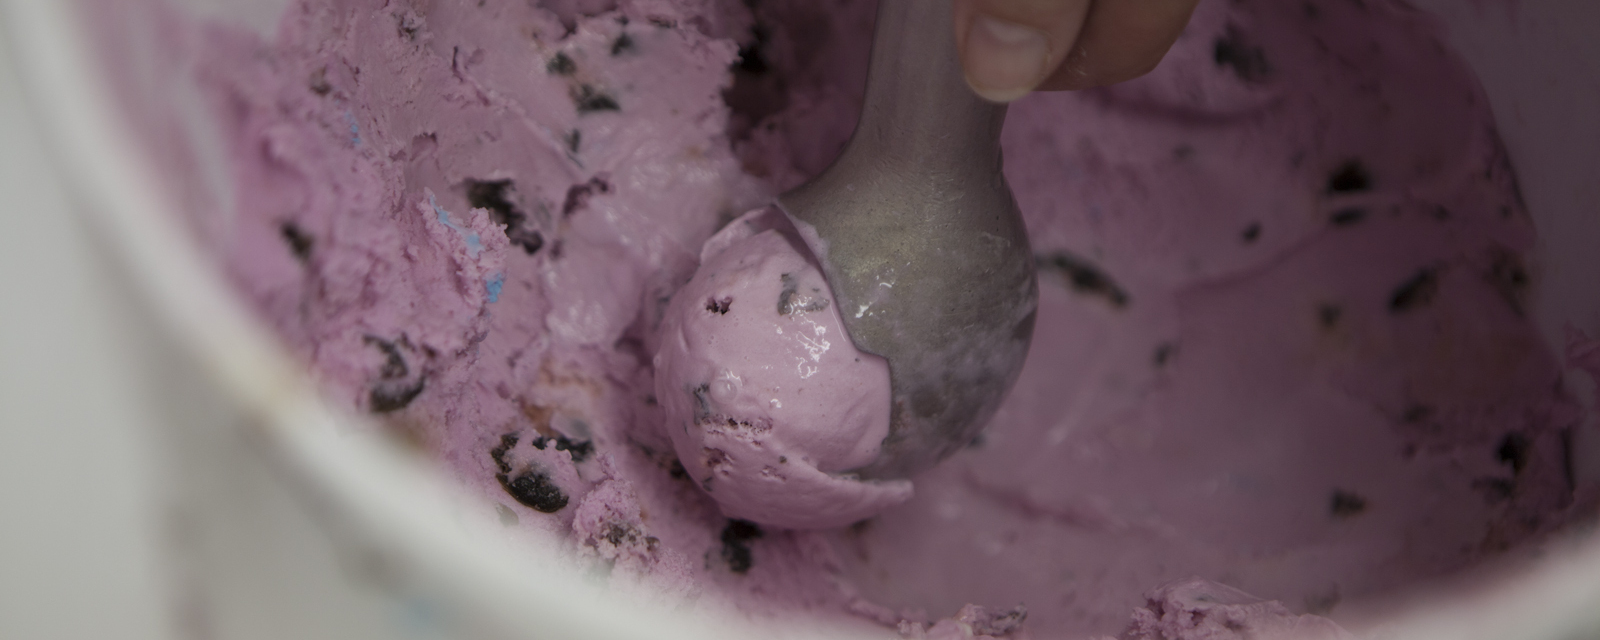 close up of someone scooping lilac coloured icecream